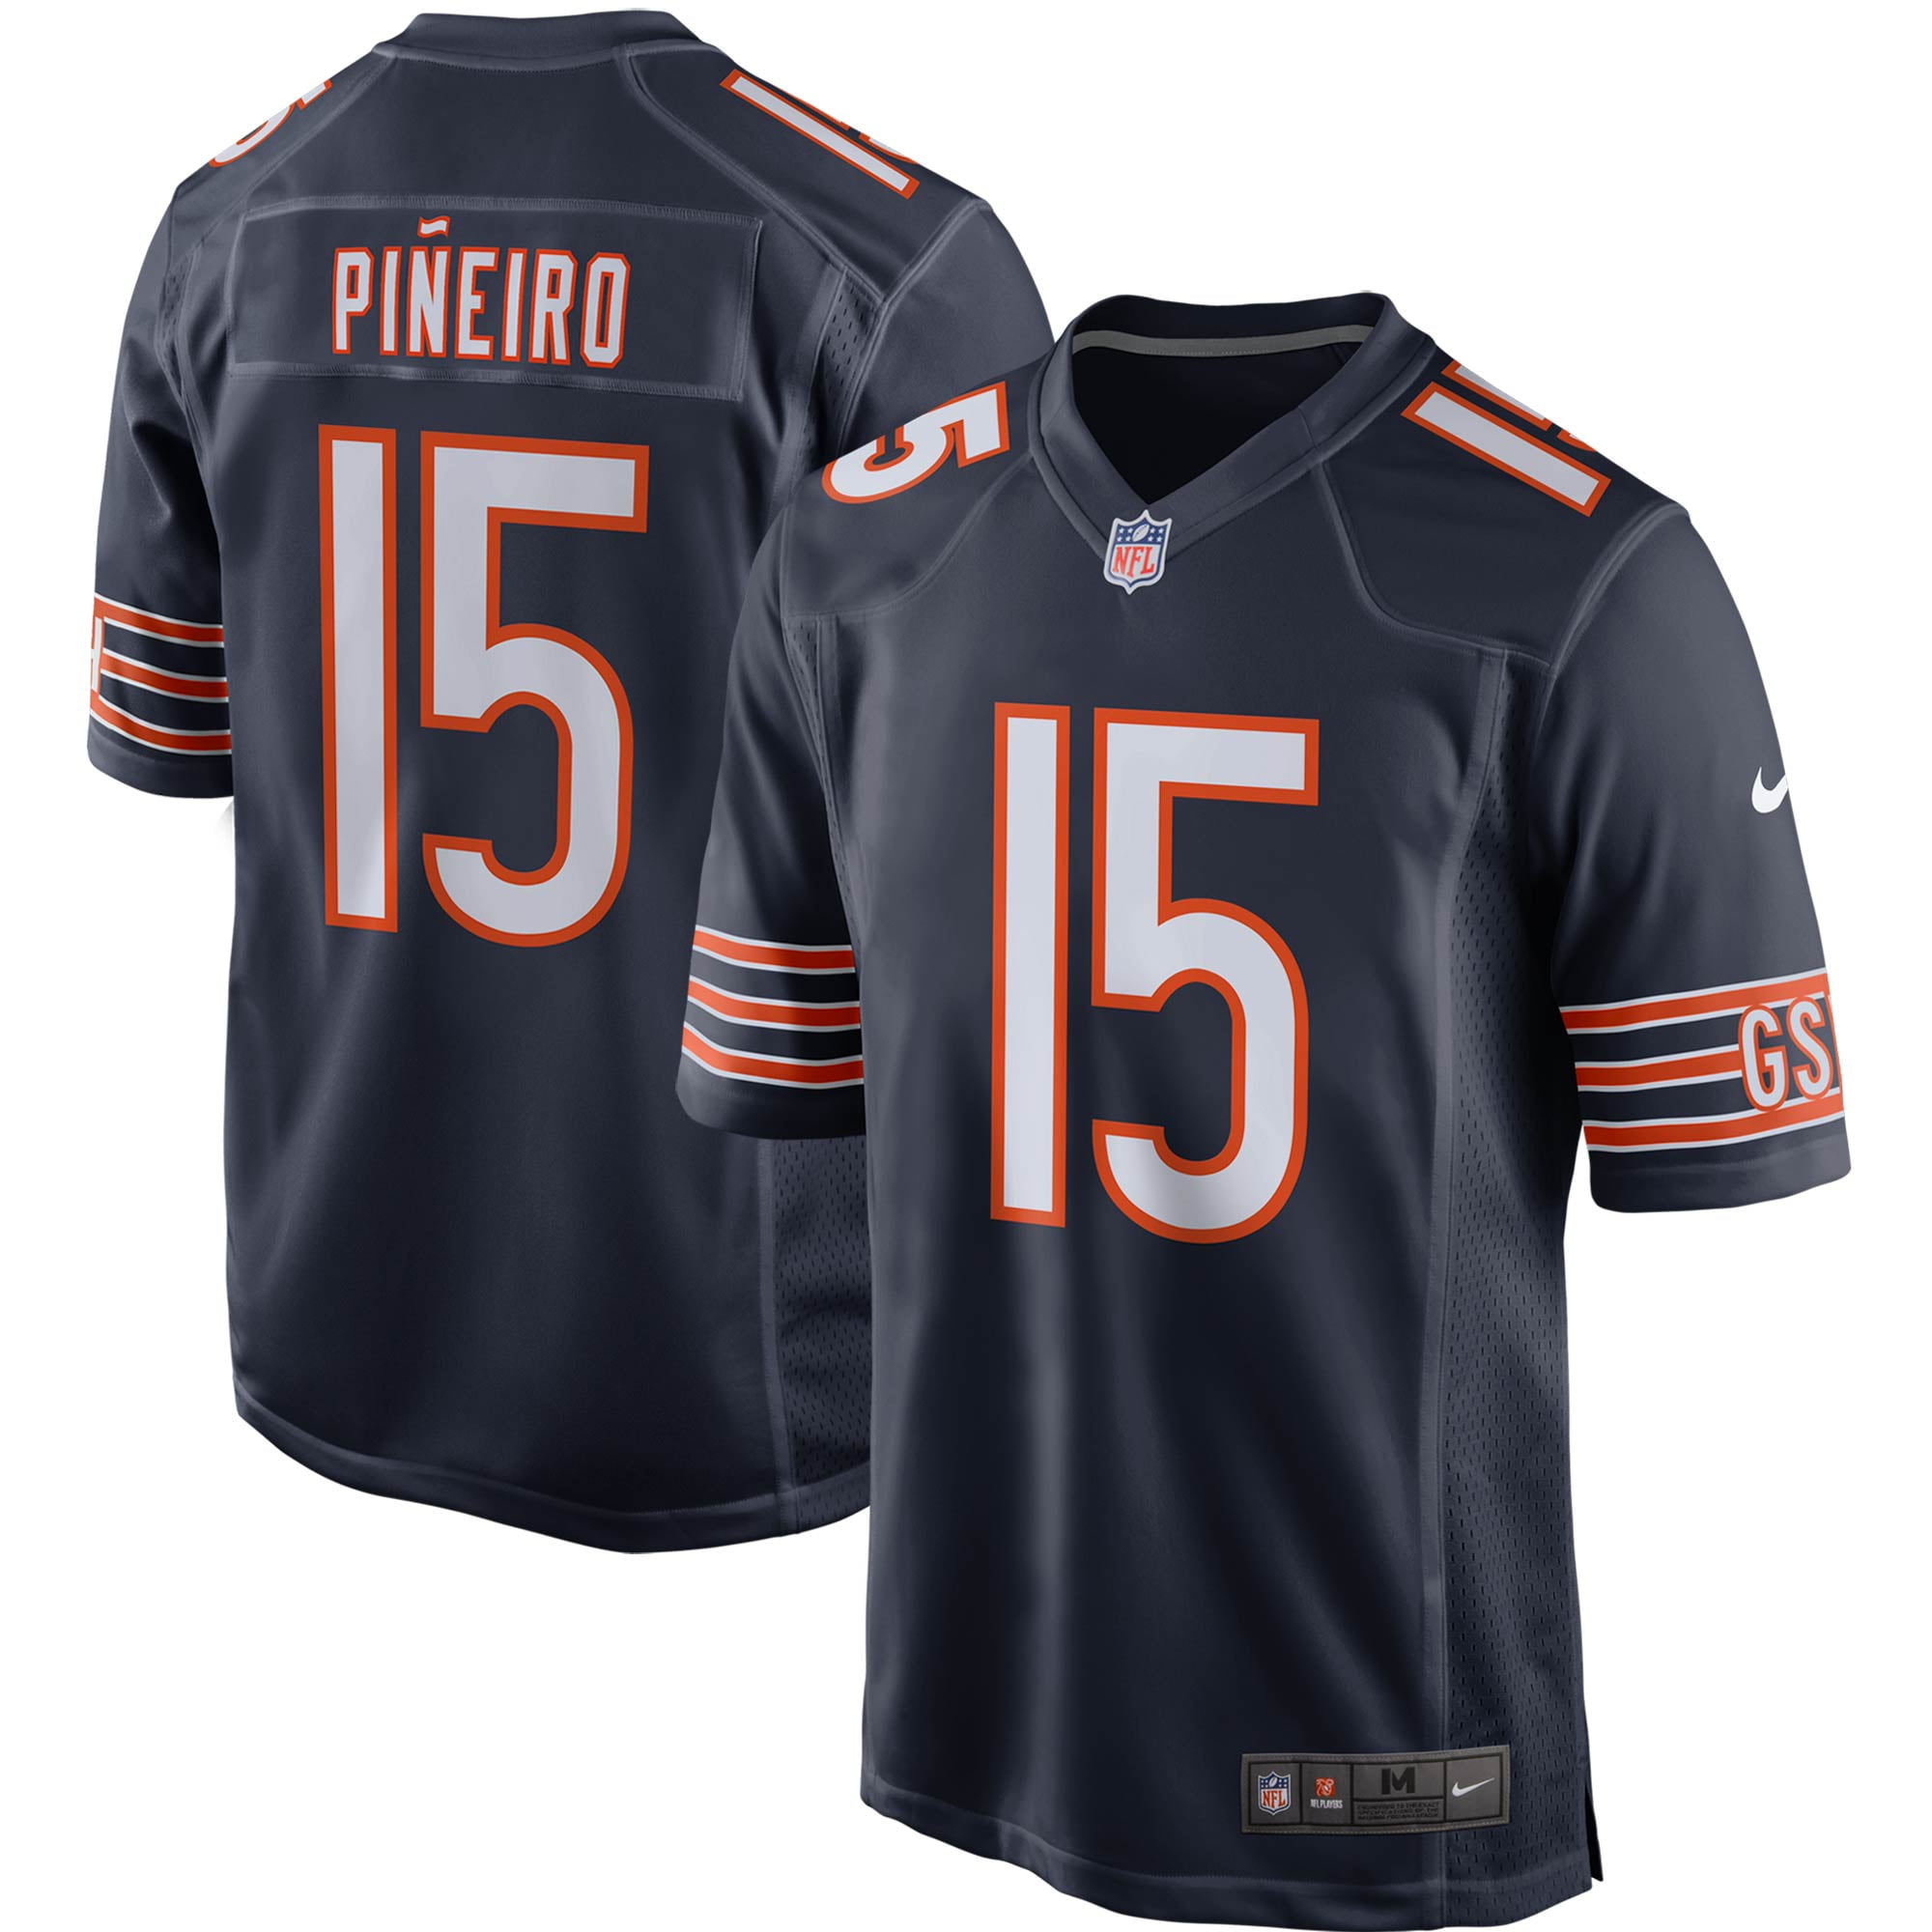 chicago bears 15 jersey